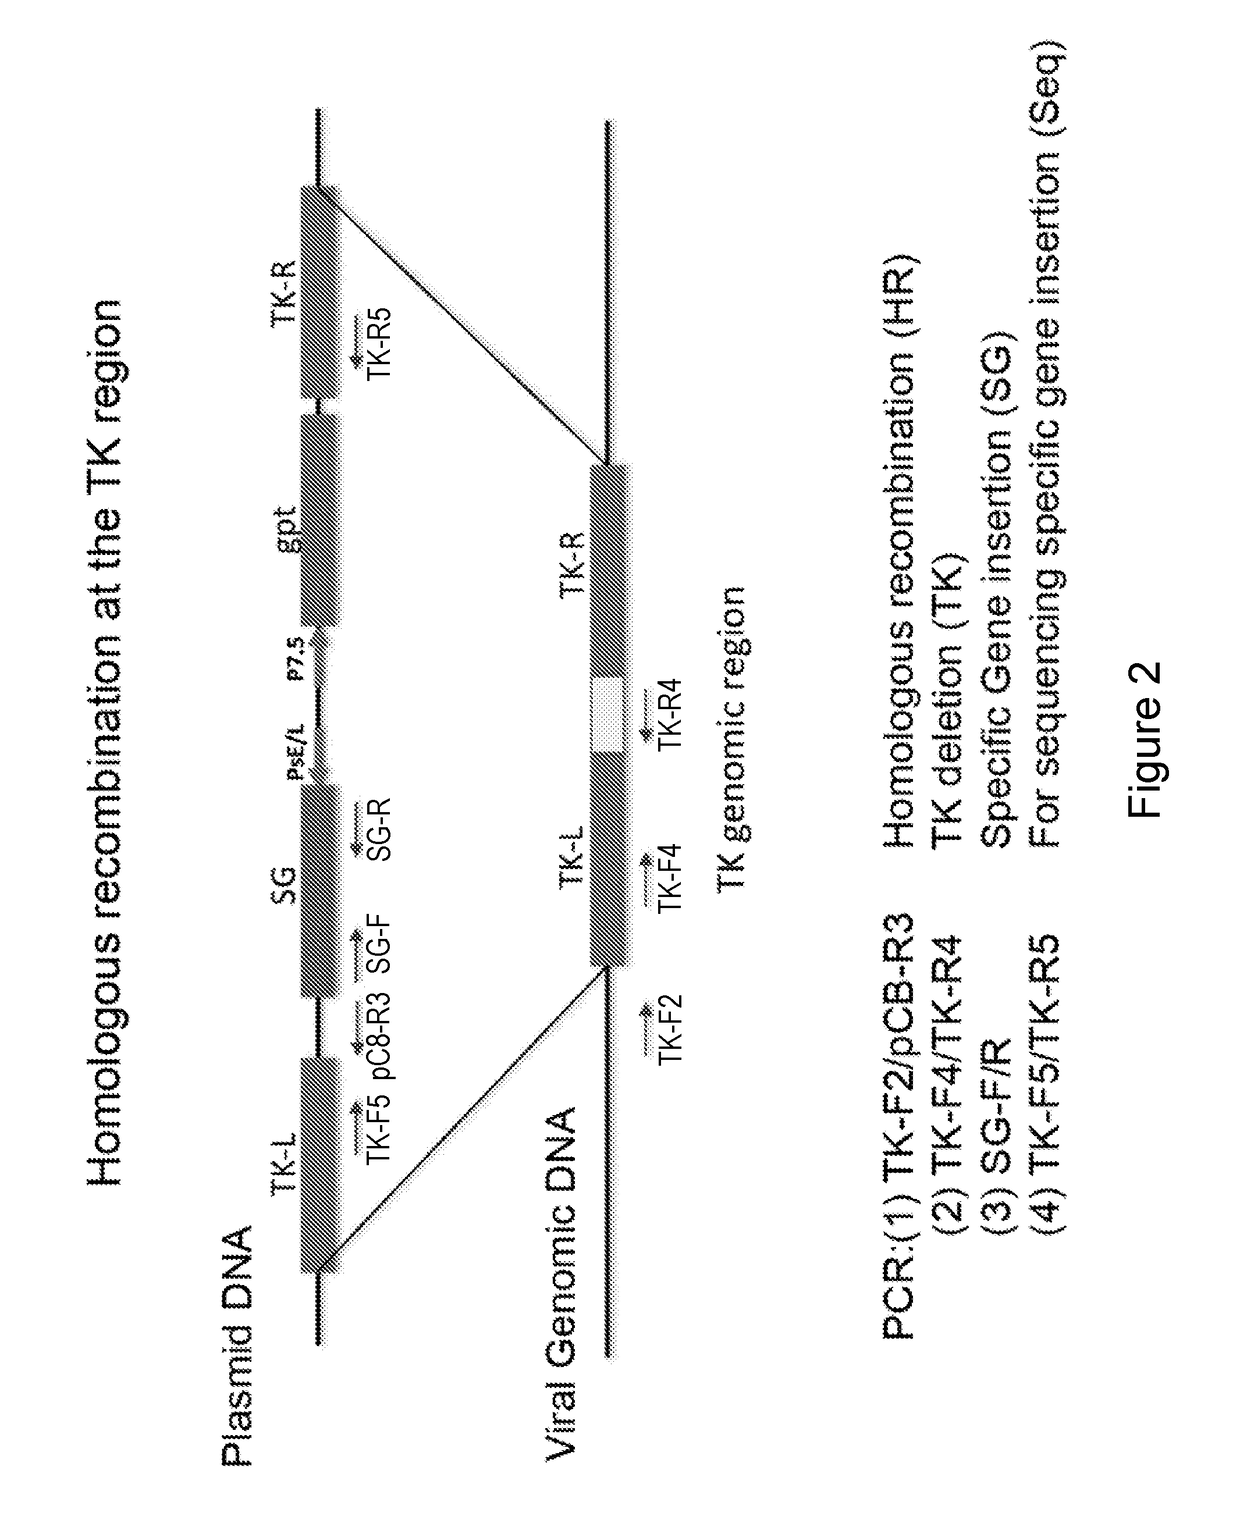 Replication competent attenuated vaccinia viruses with deletion of thymidine kinase with and without the expression of human flt3l or gm-csf for cancer immunotherapy